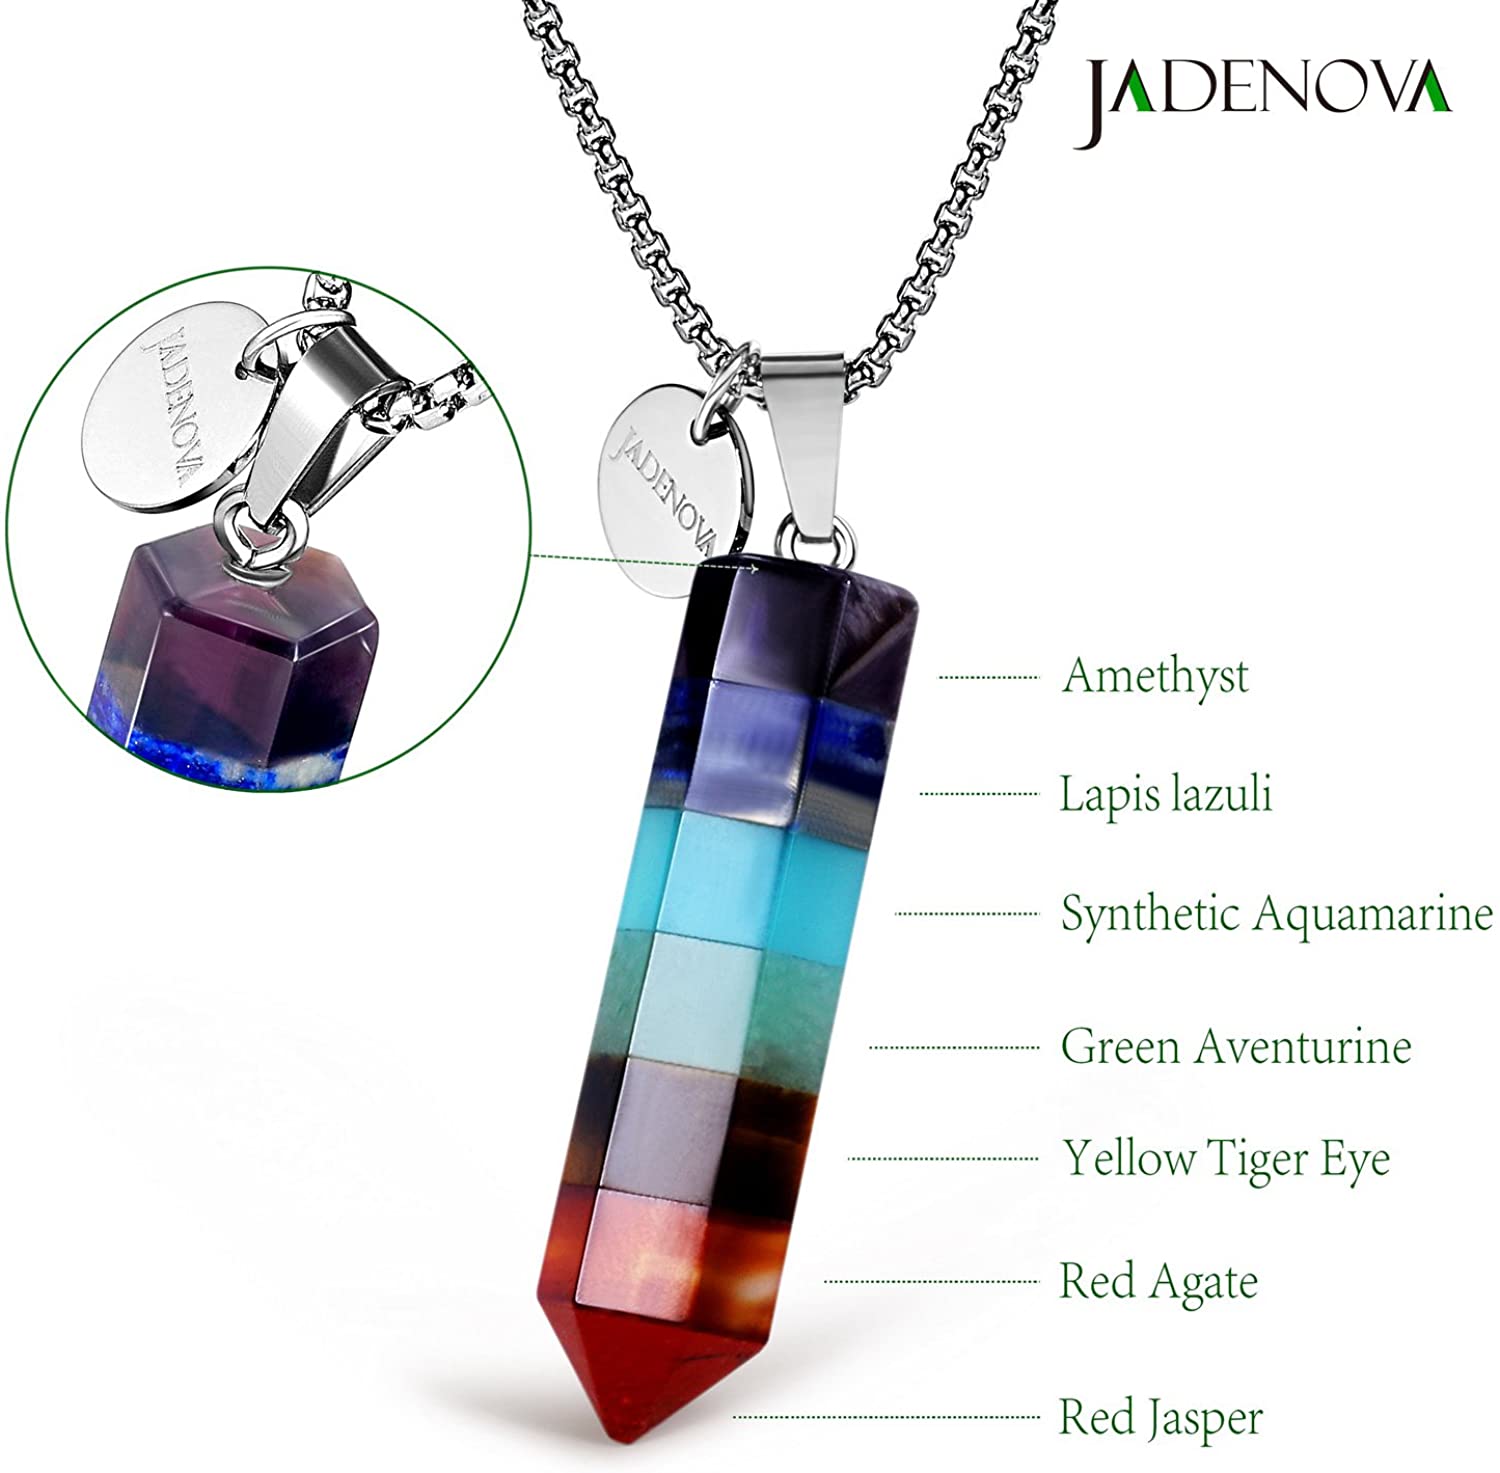 Rock crystal necklace made of stainless steel and precious stones